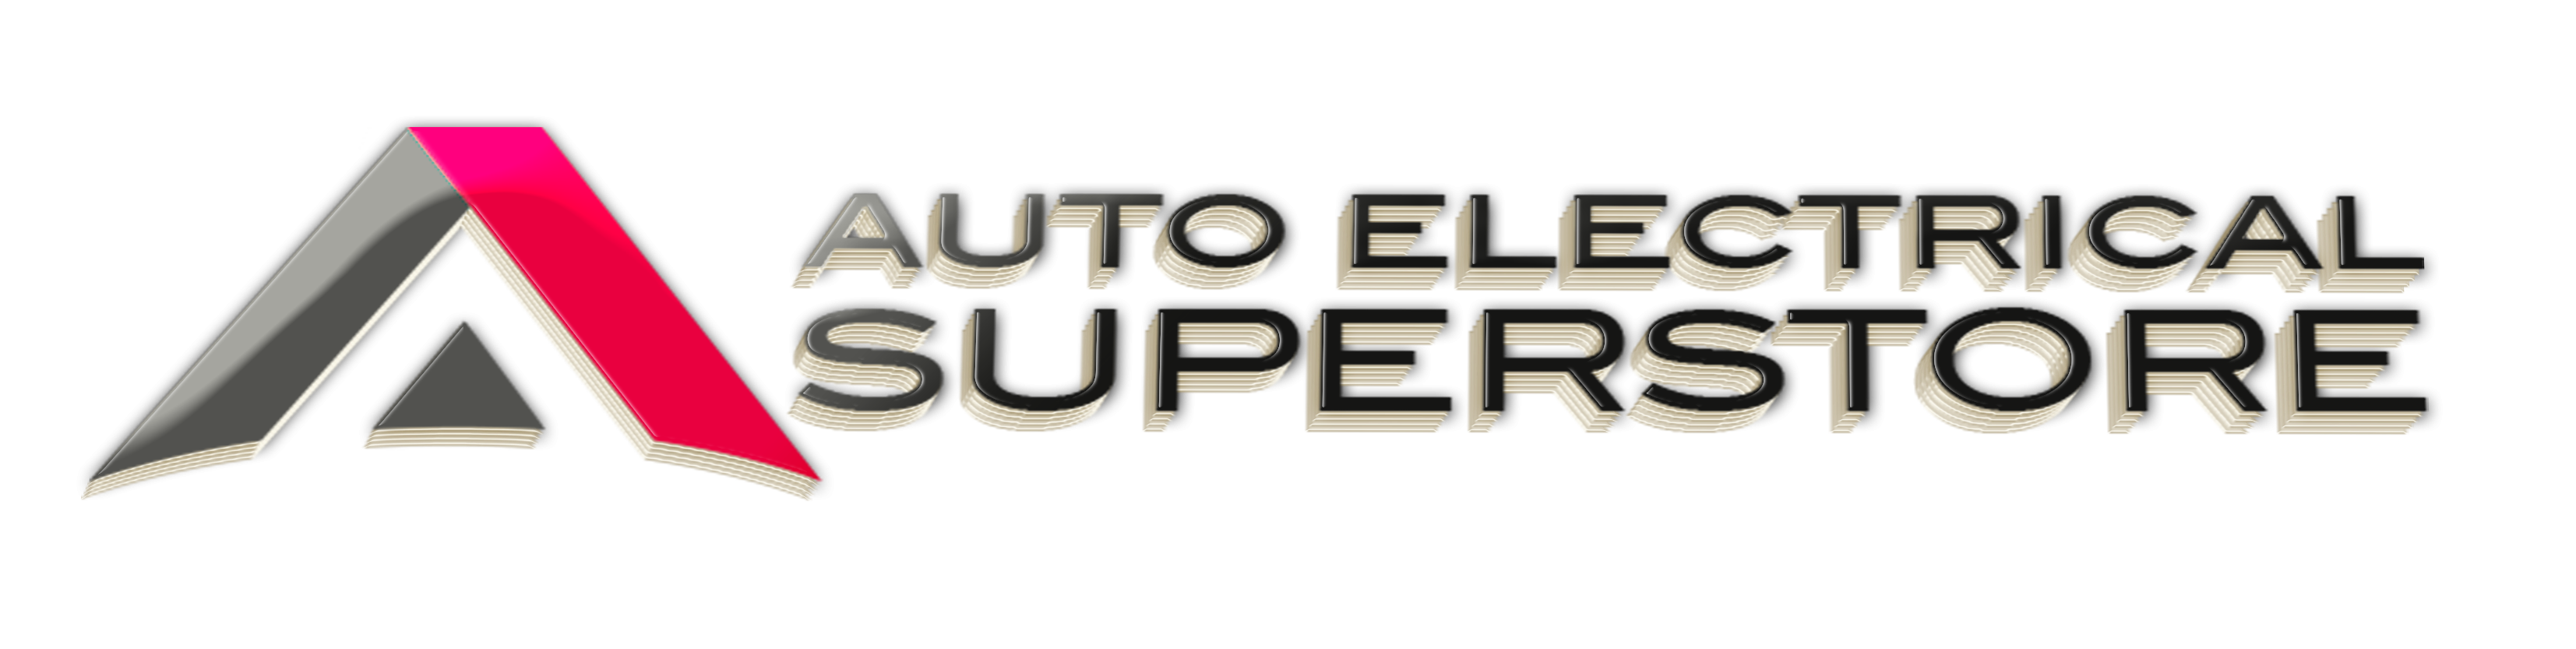 Auto Electrical Superstore